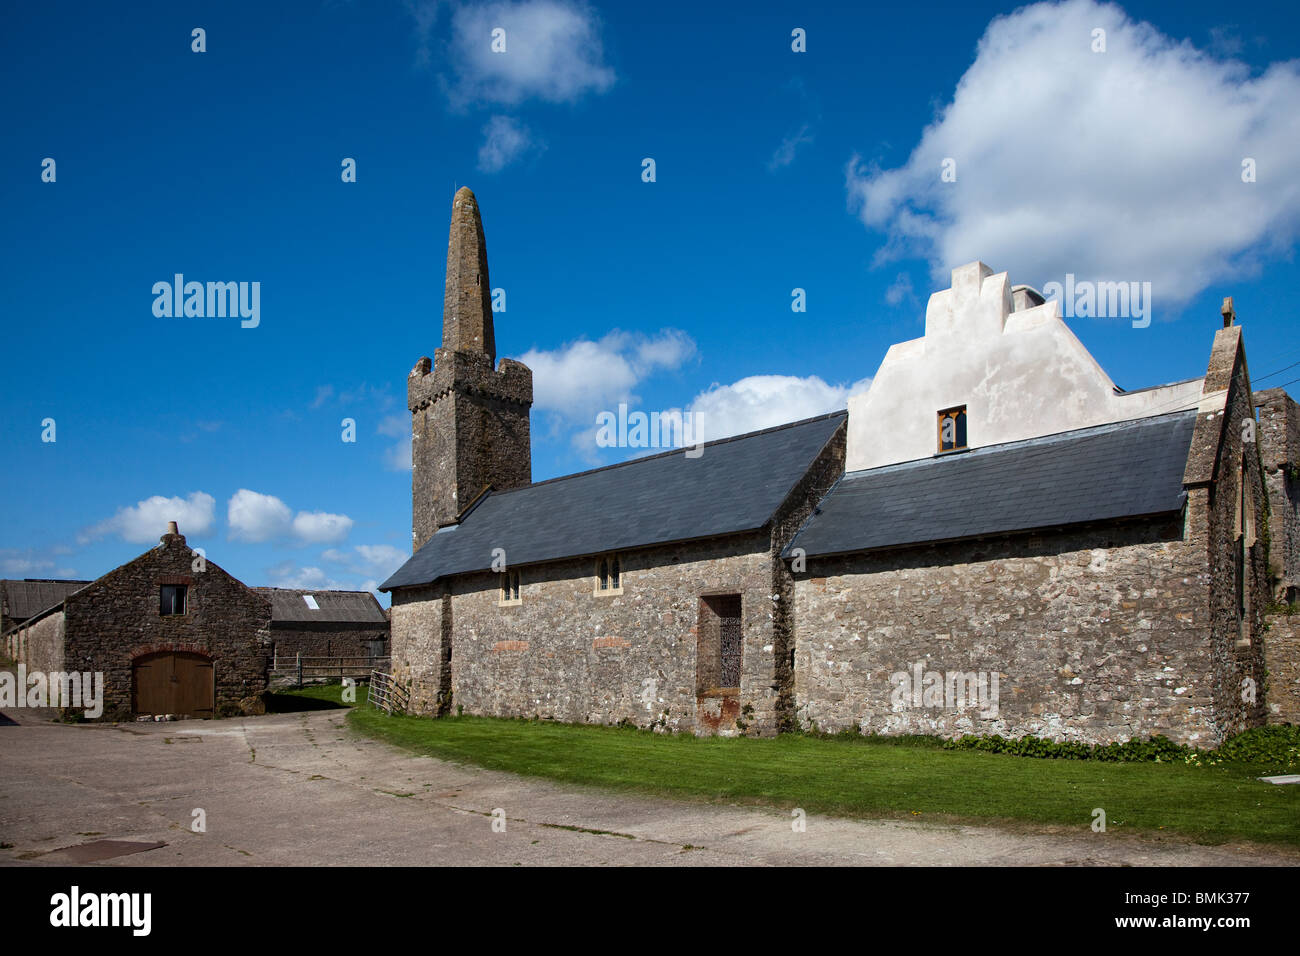 St Illtyd's Church and leaning tower Caldey Island Wales UK Stock Photo